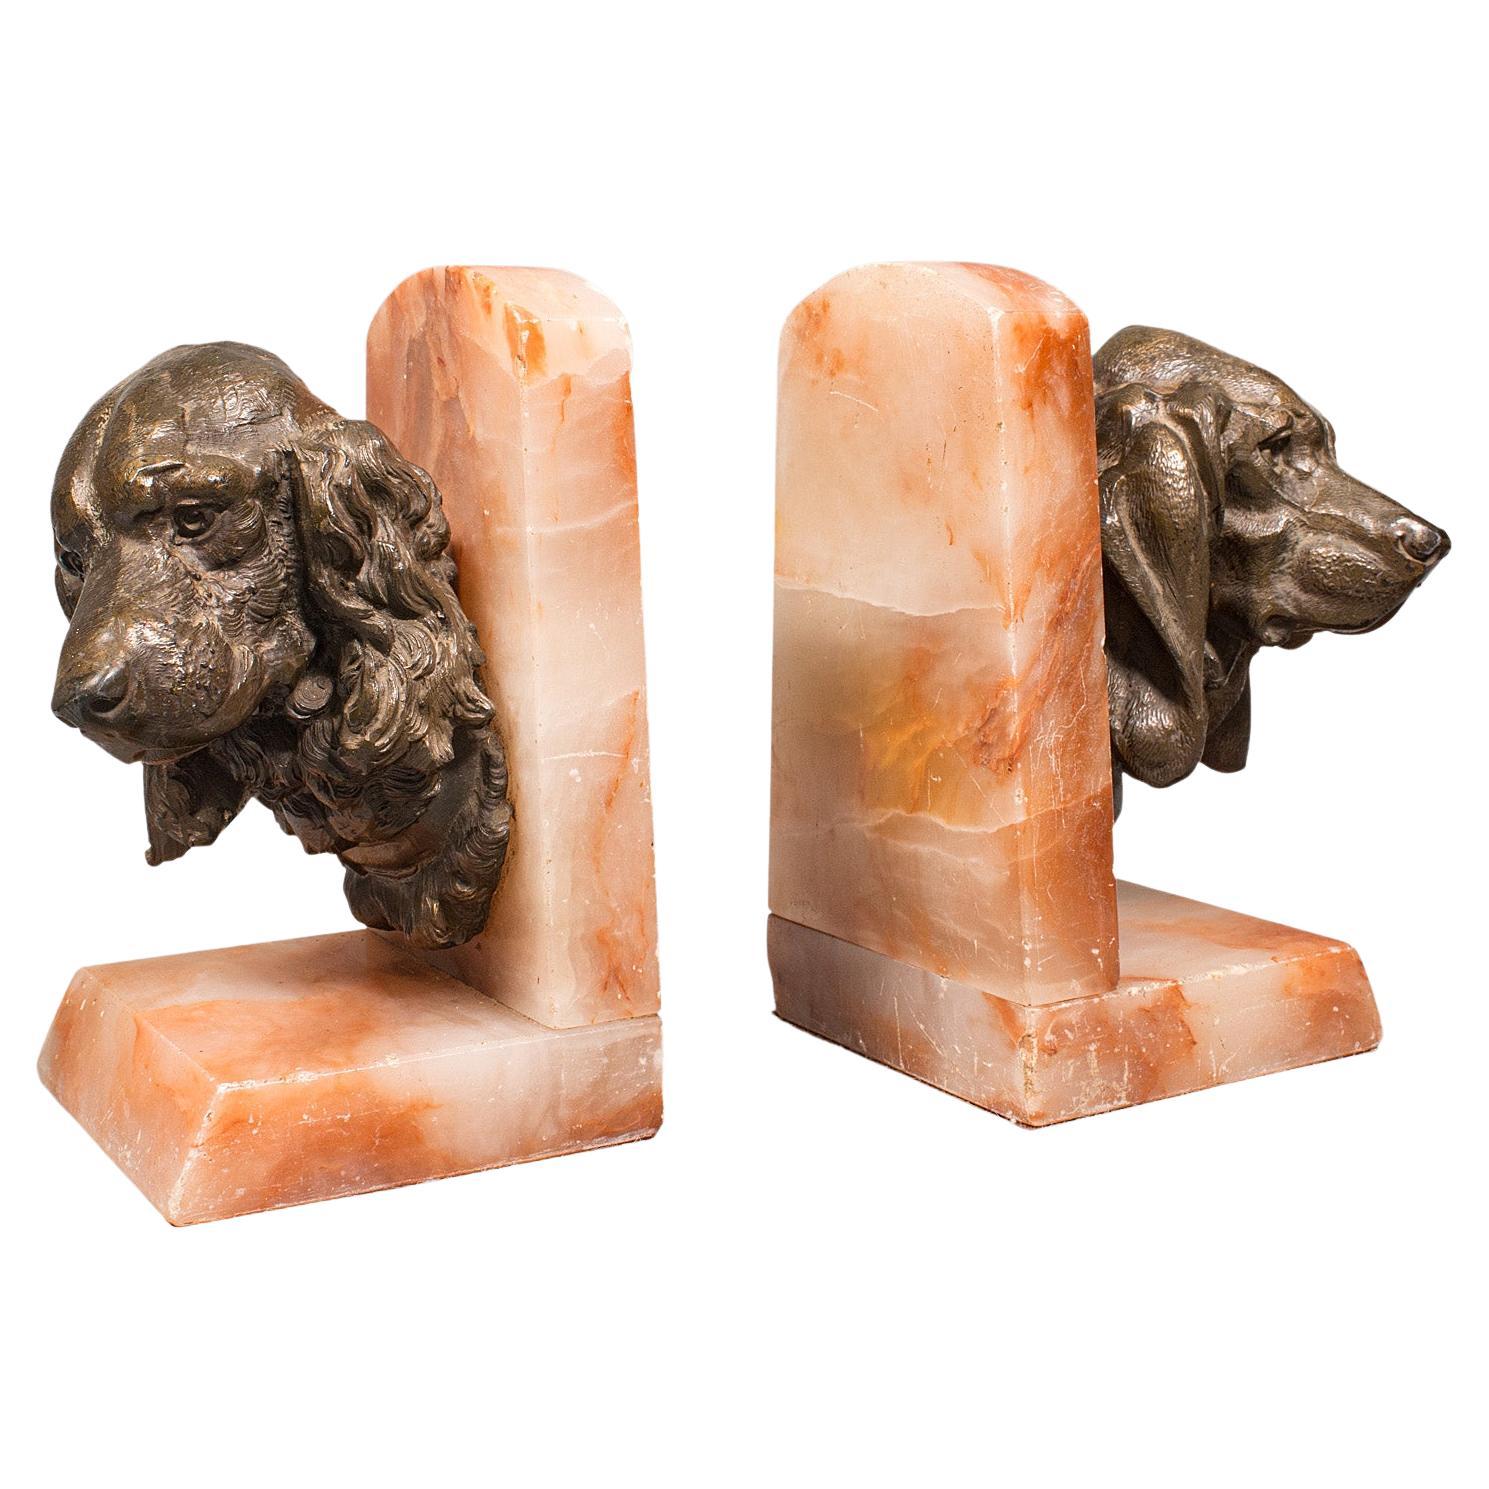 Pair of Antique Animalier Bookends, French, Spelter, Onyx, Lecourtier, Victorian For Sale